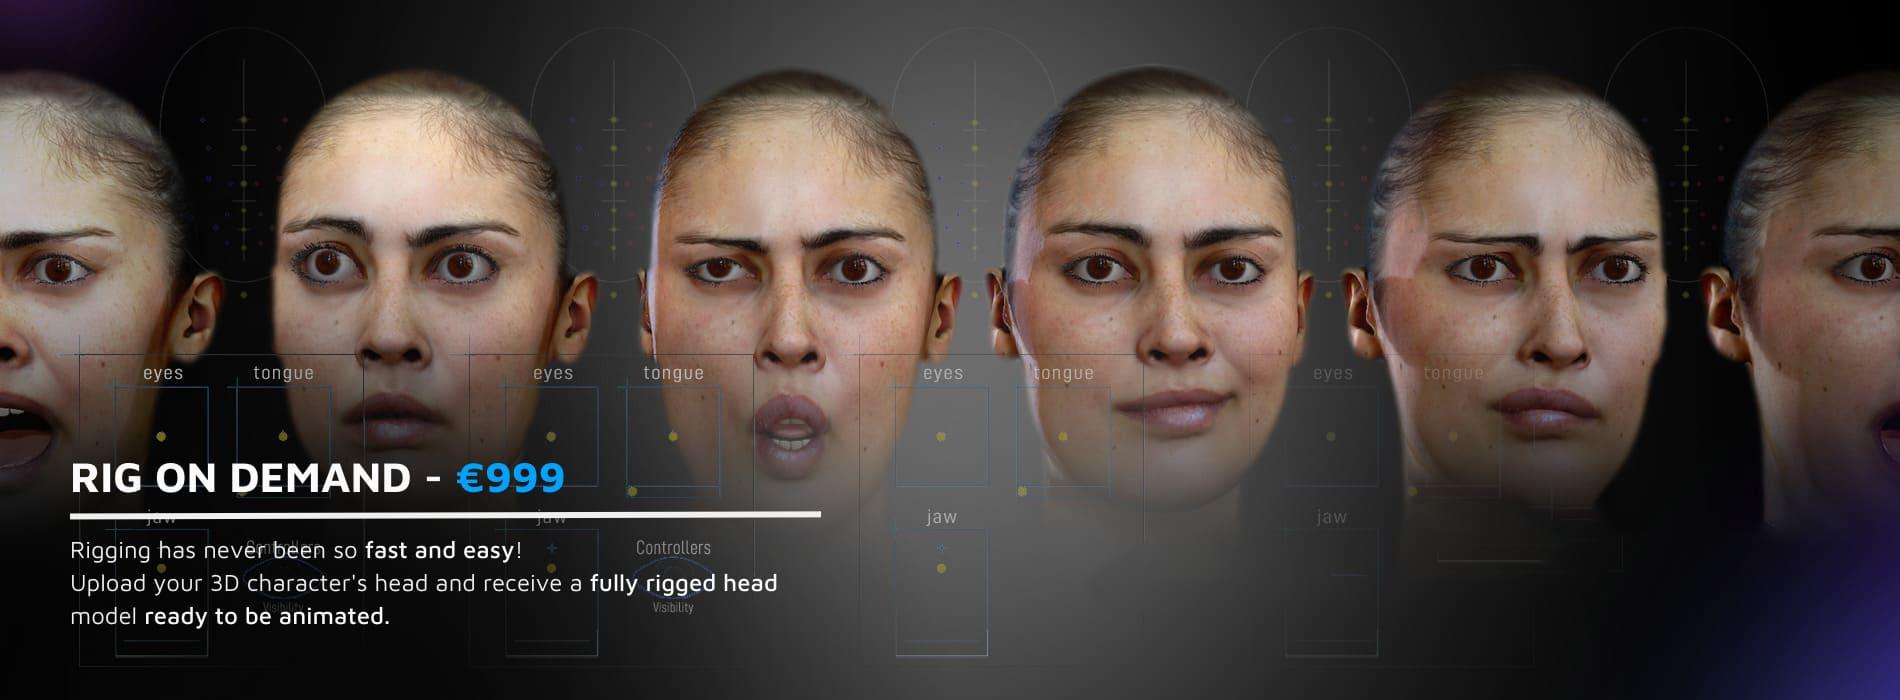 3D model of a girl making different expressions through blendshapes thanks to a 3D rig